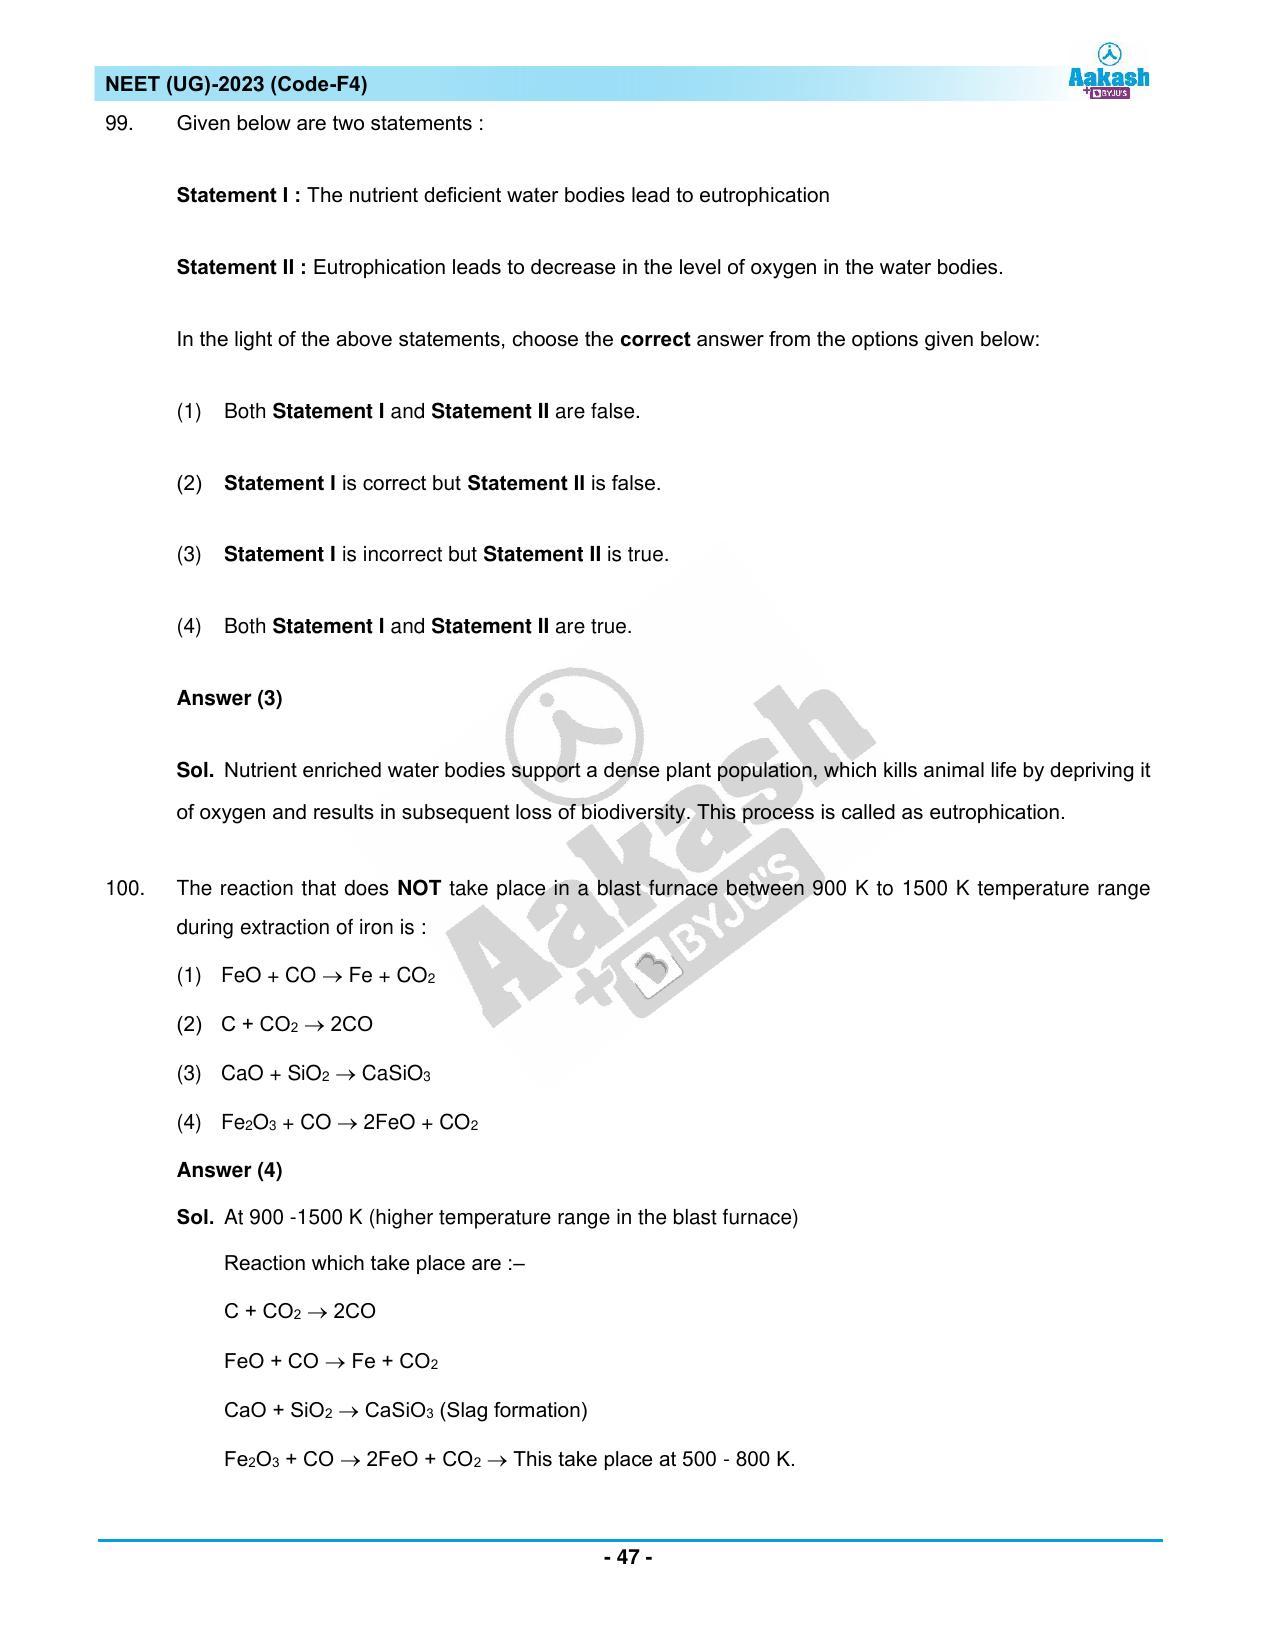 NEET 2023 Question Paper F4 - Page 47